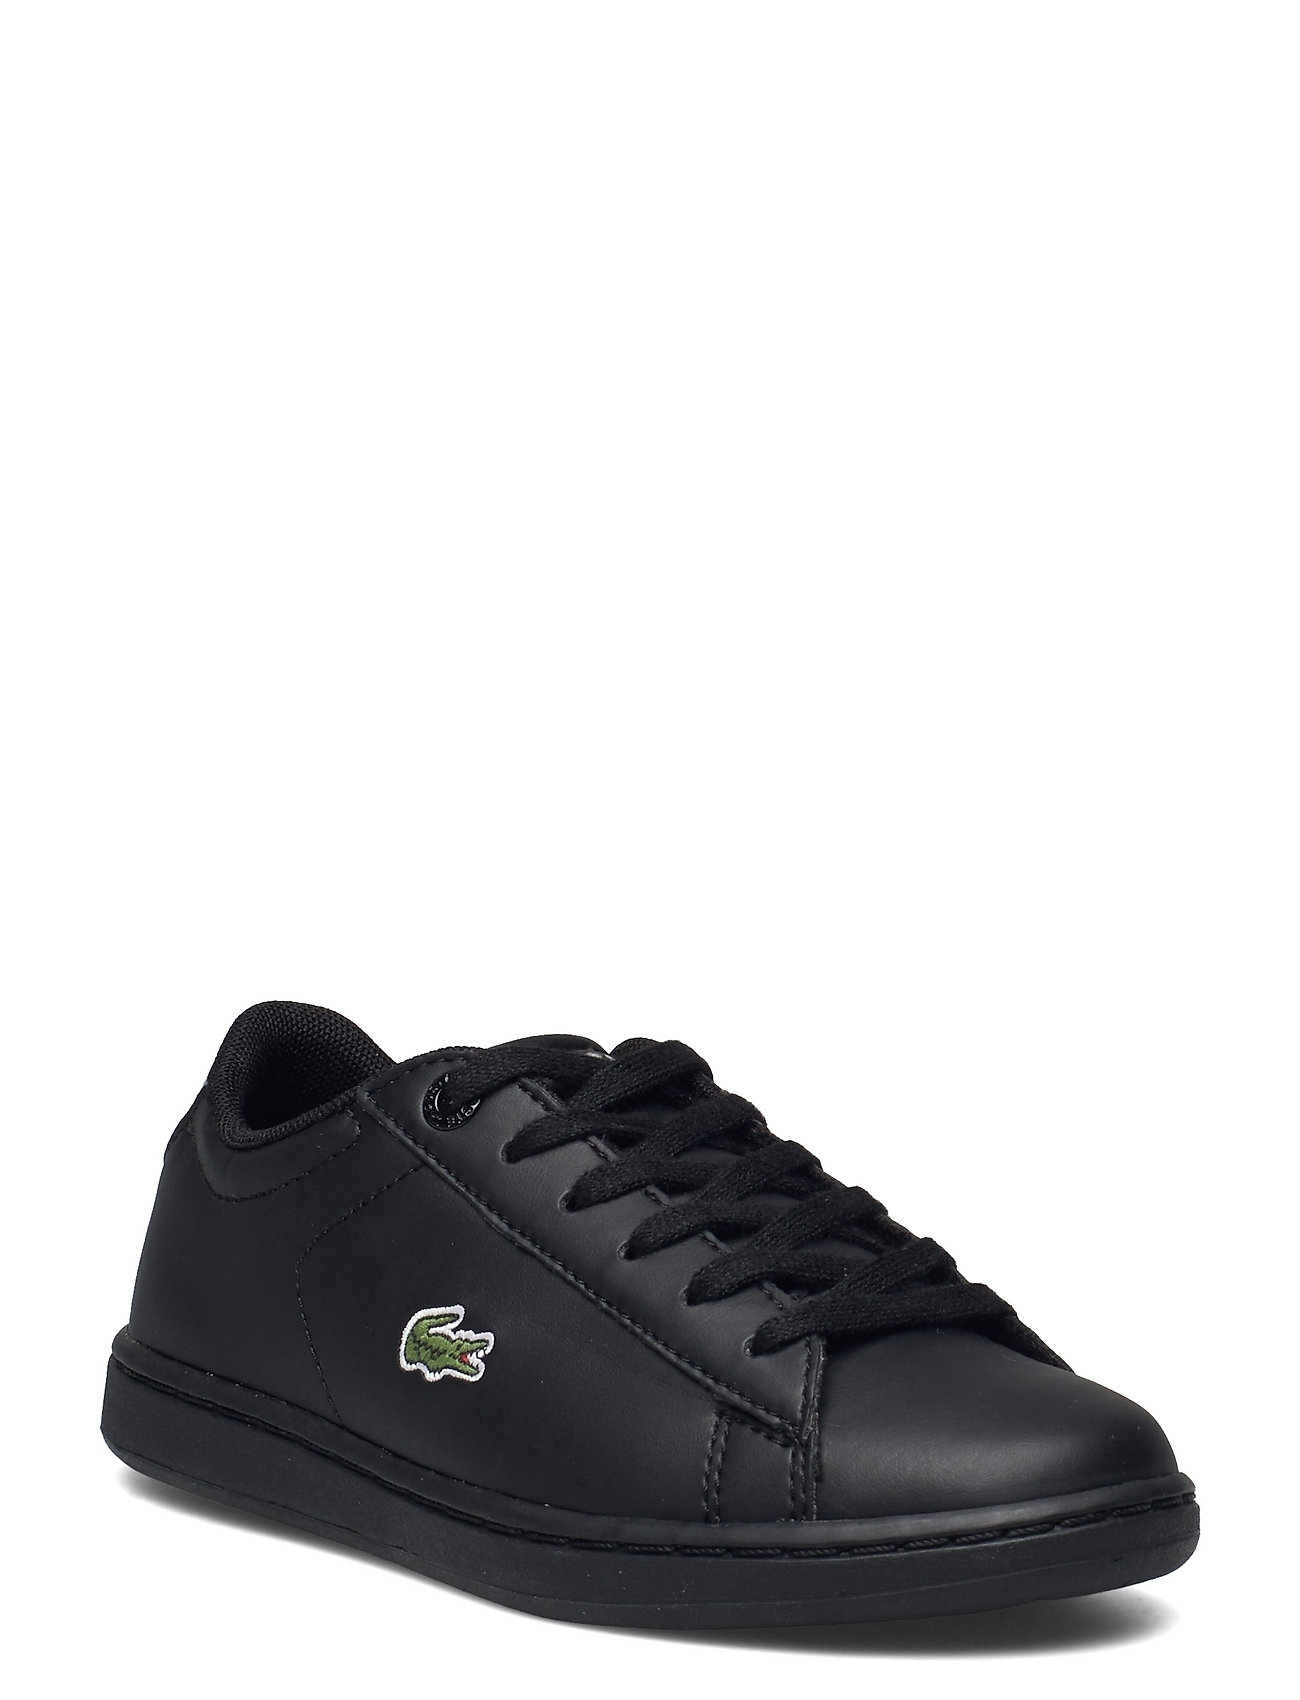 Shoes Carnaby Evo Bl 21 1 (Blk/blk Synthetic), €) | Large selection outlet-styles | Booztlet.com